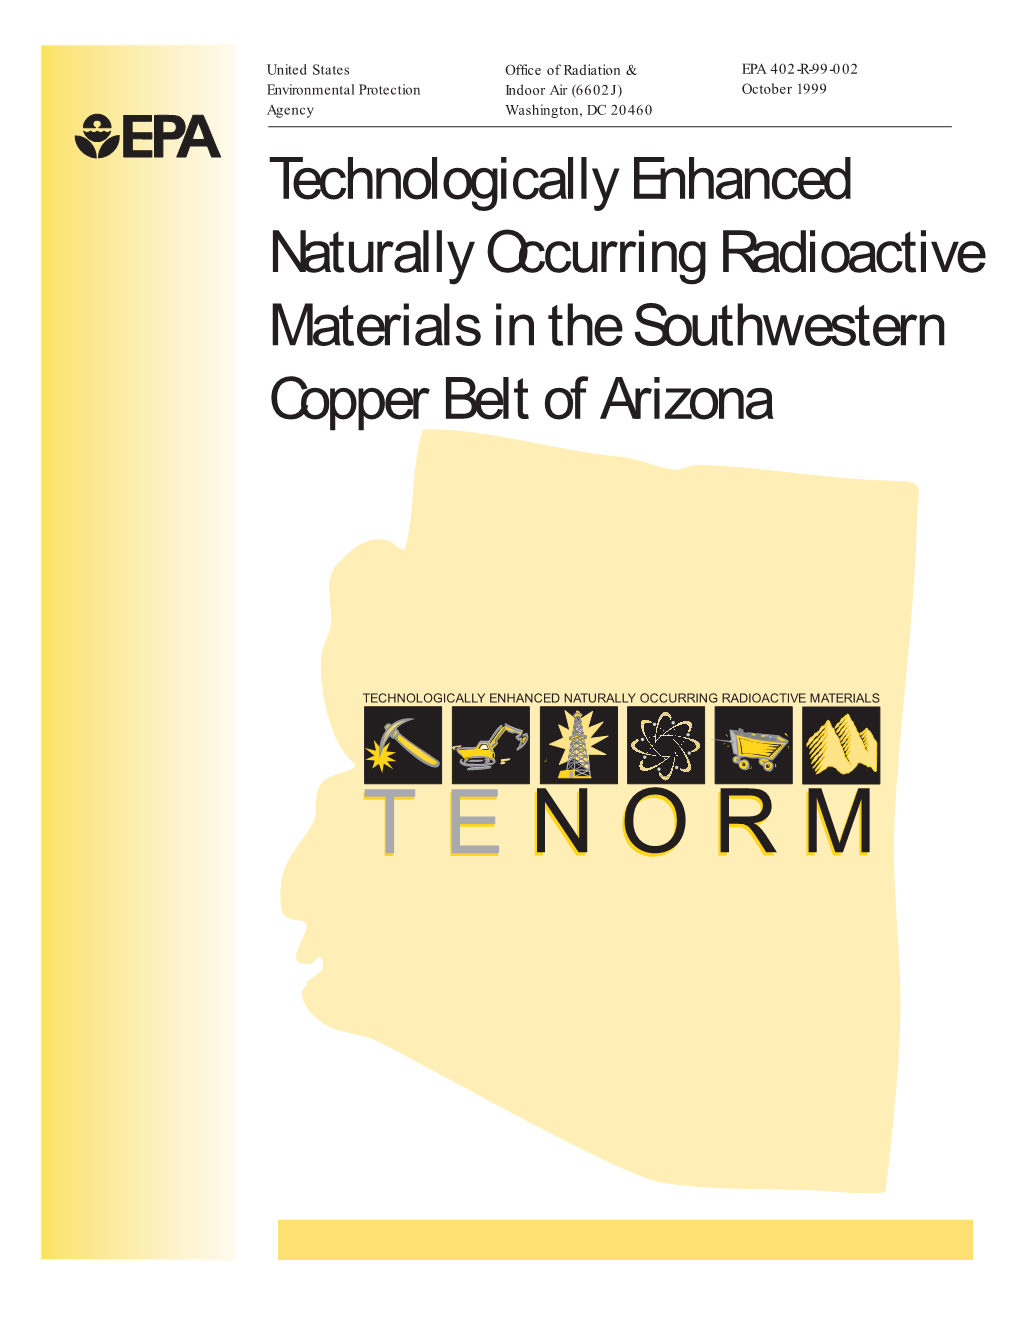 Technologically Enhanced Naturally Occurring Radioactive Materials in the Southwestern Copper Belt of Arizona